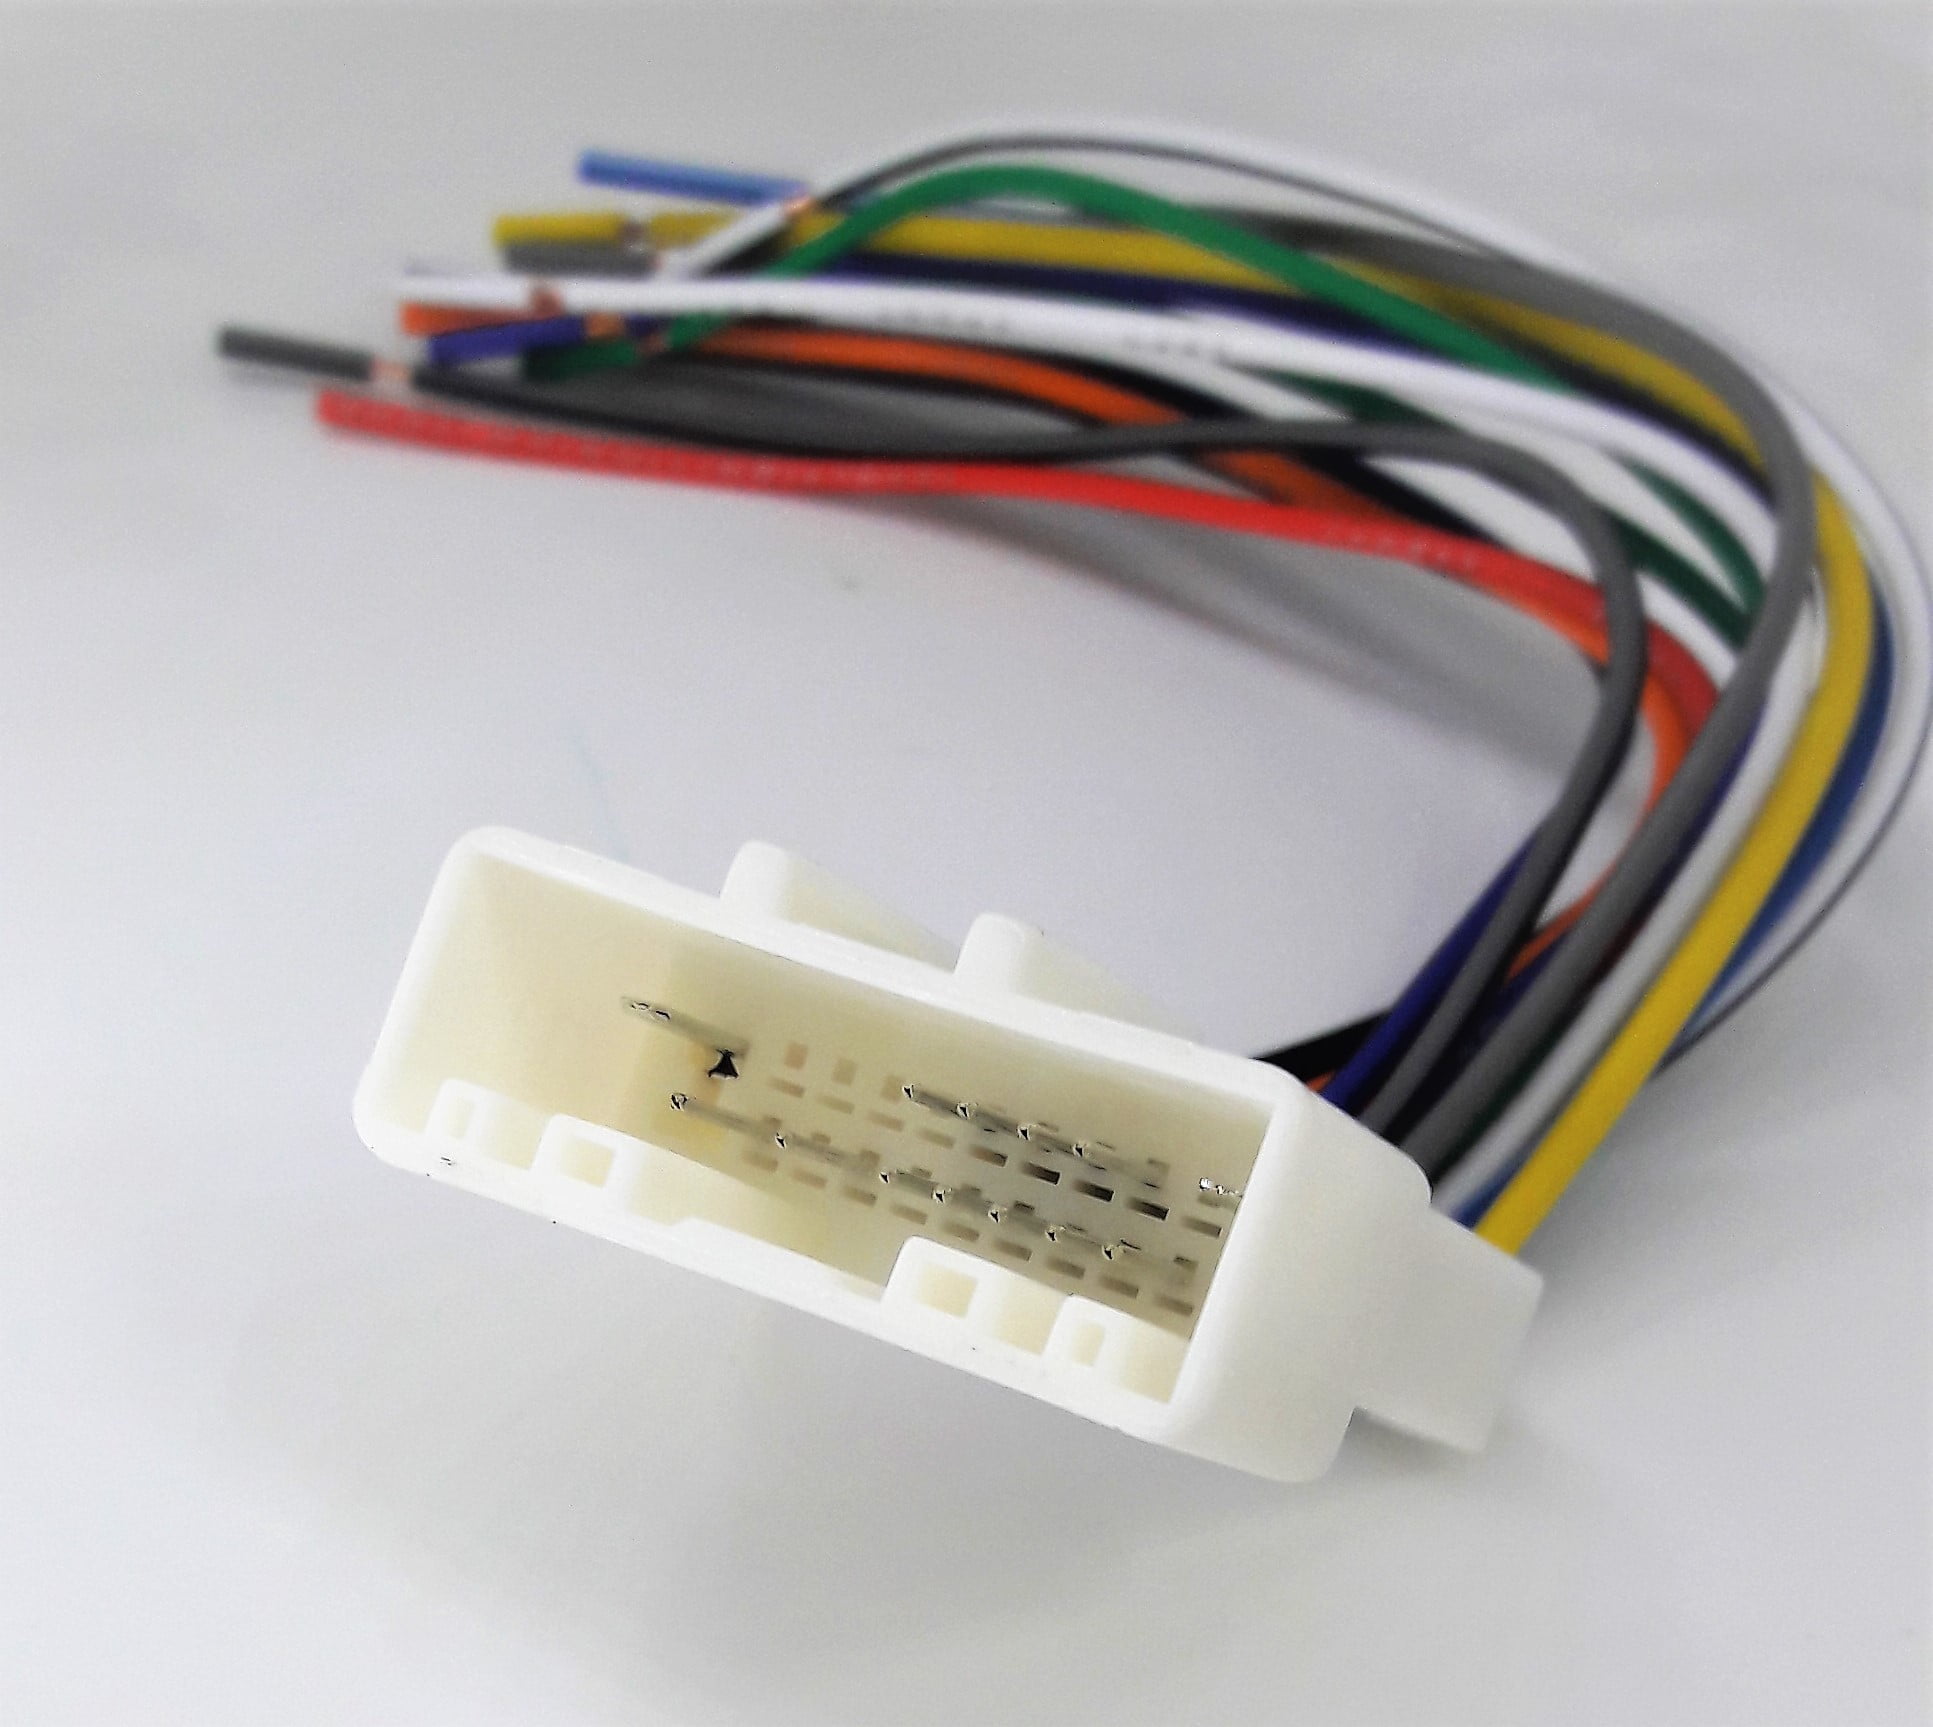 Nissan Versa Wiring Harness from i5.walmartimages.com